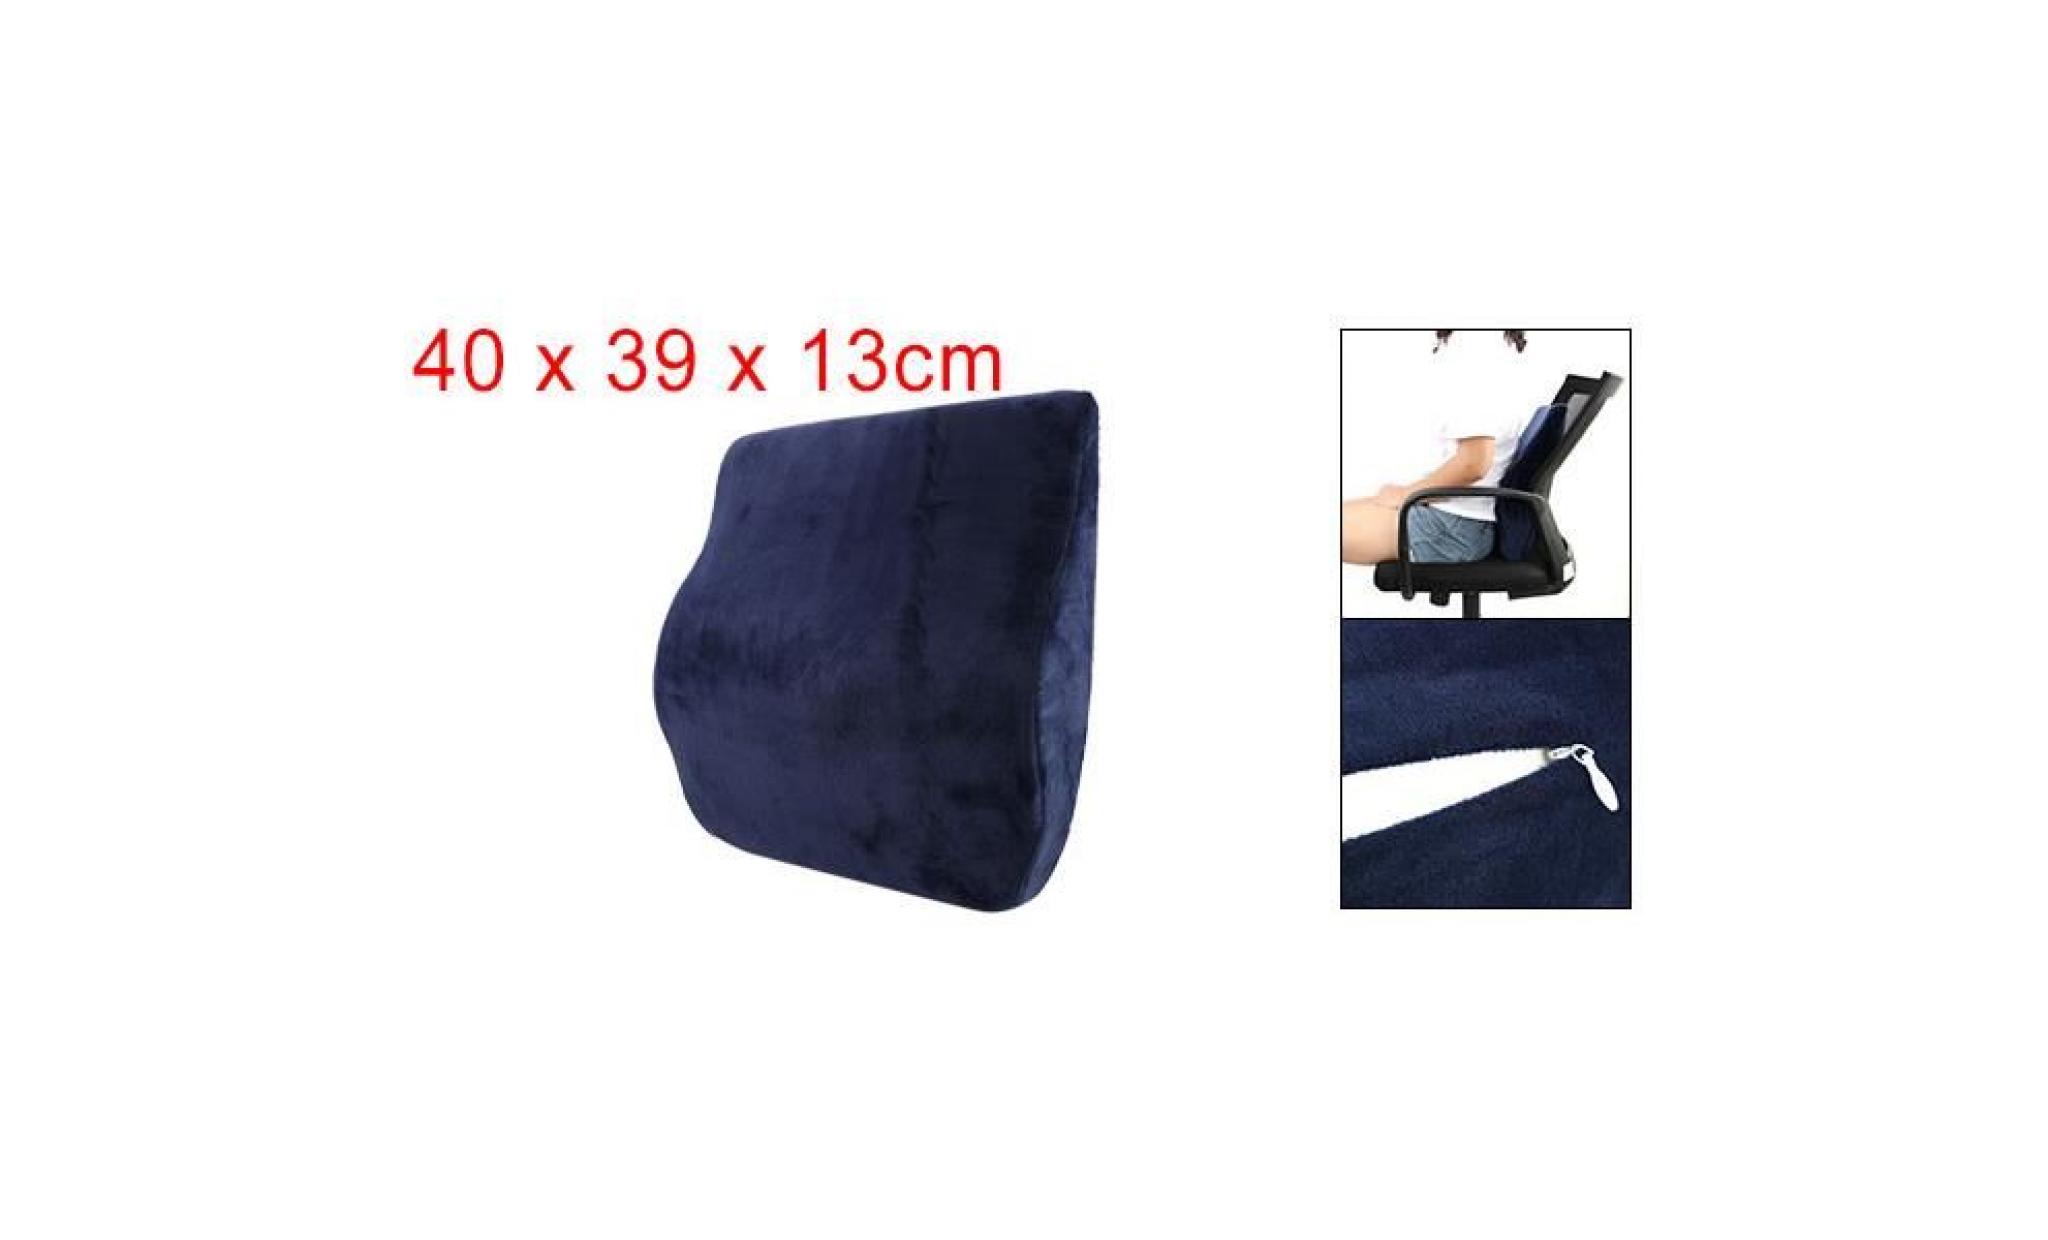 memory foam lumbar cushion back support pillow with removable pillow case blue pas cher